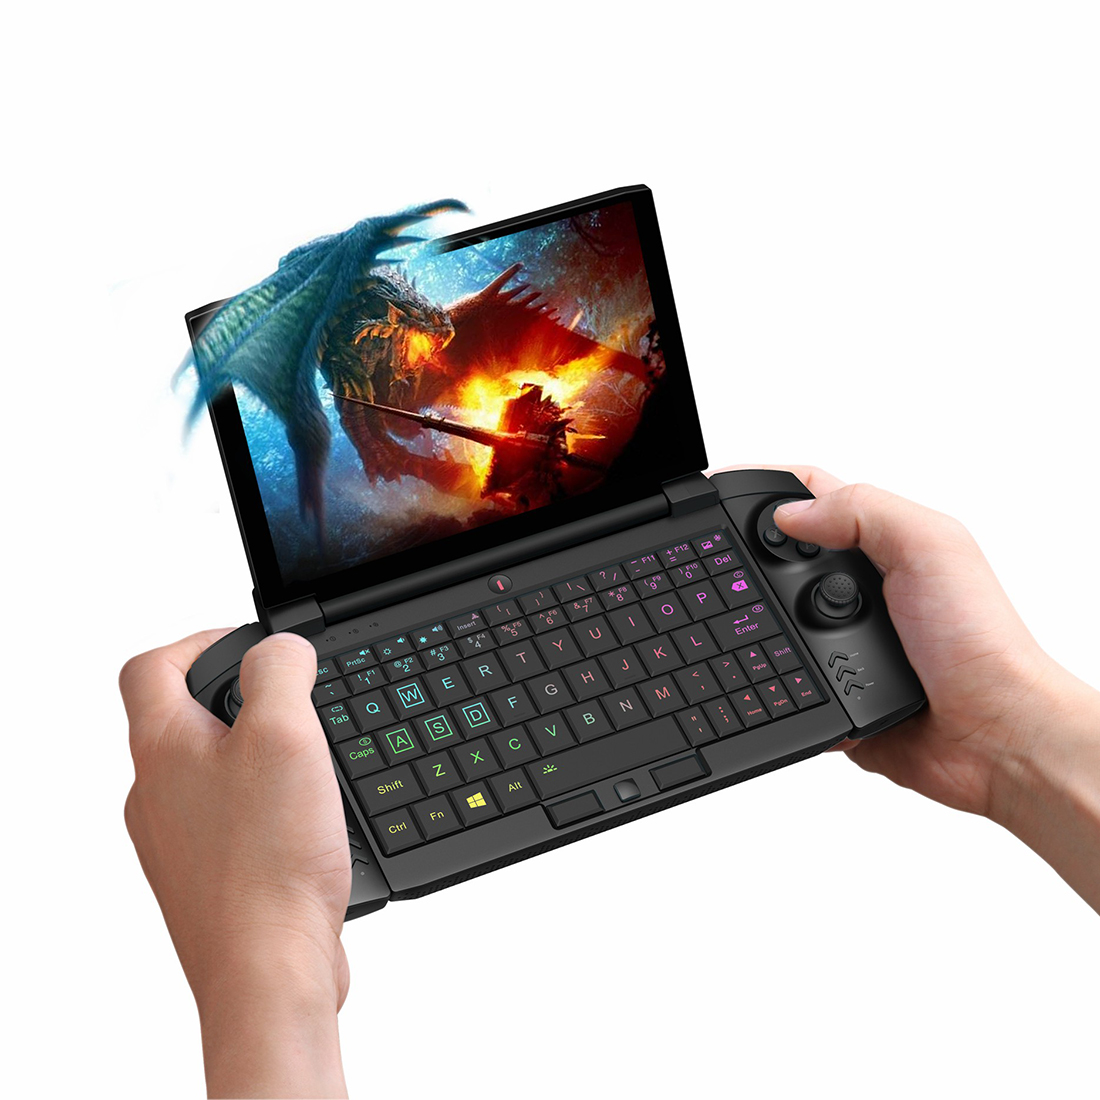 ONE-GX1 Pro Gaming Notebook 7-Inch 5G Version